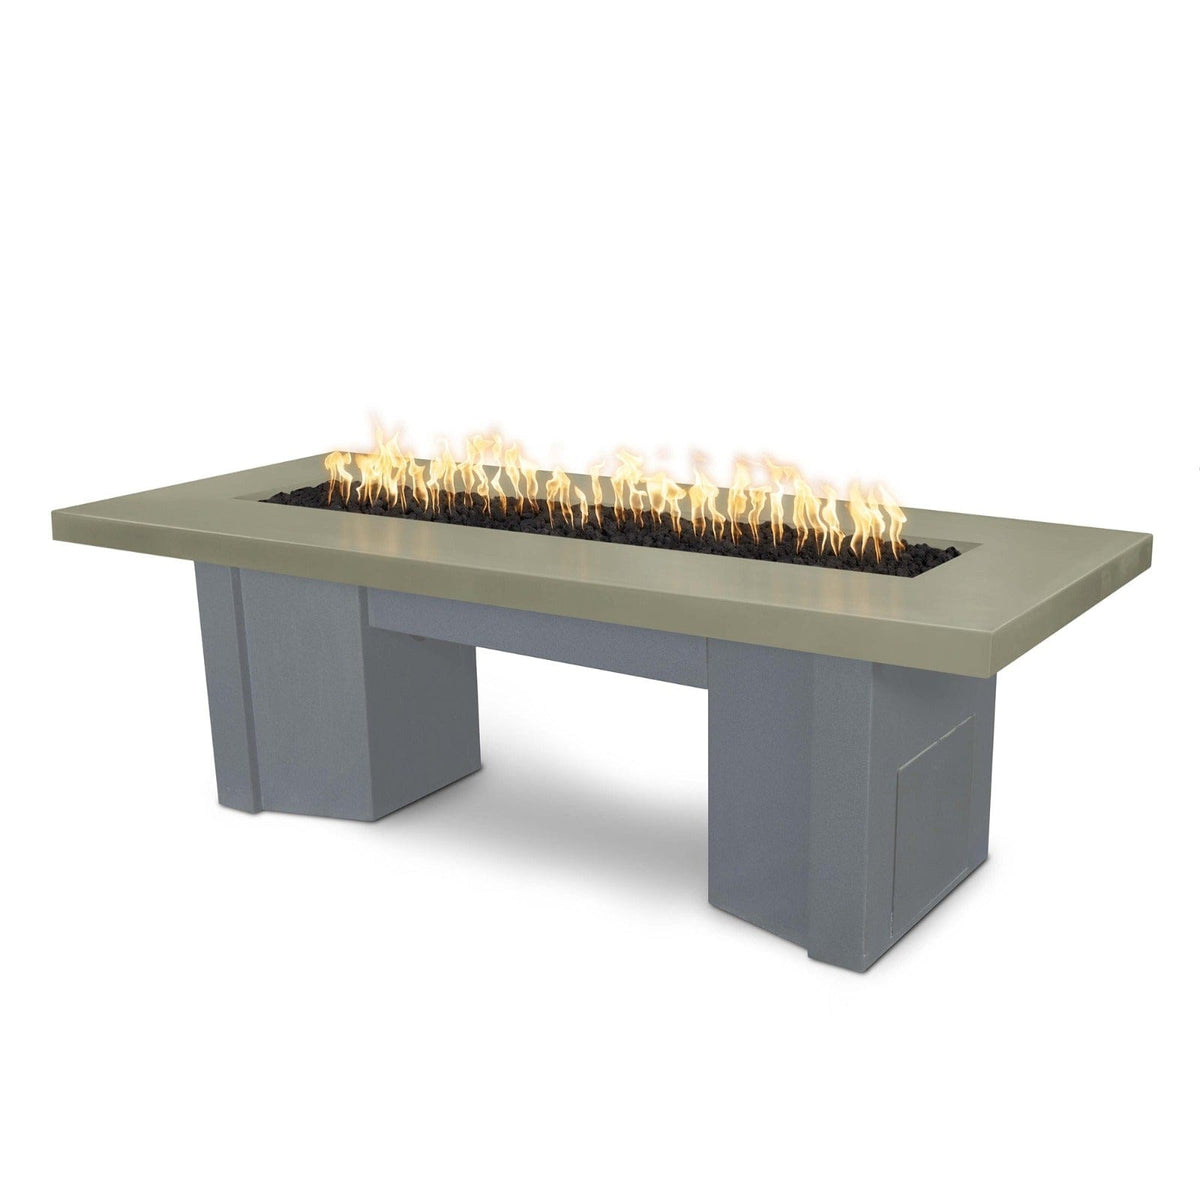 The Outdoor Plus Fire Features Ash (-ASH) / Gray Powder Coated Steel (-GRY) The Outdoor Plus 60&quot; Alameda Fire Table Smooth Concrete in Natural Gas - Flame Sense System with Push Button Spark Igniter / OPT-ALMGFRC60FSEN-NG